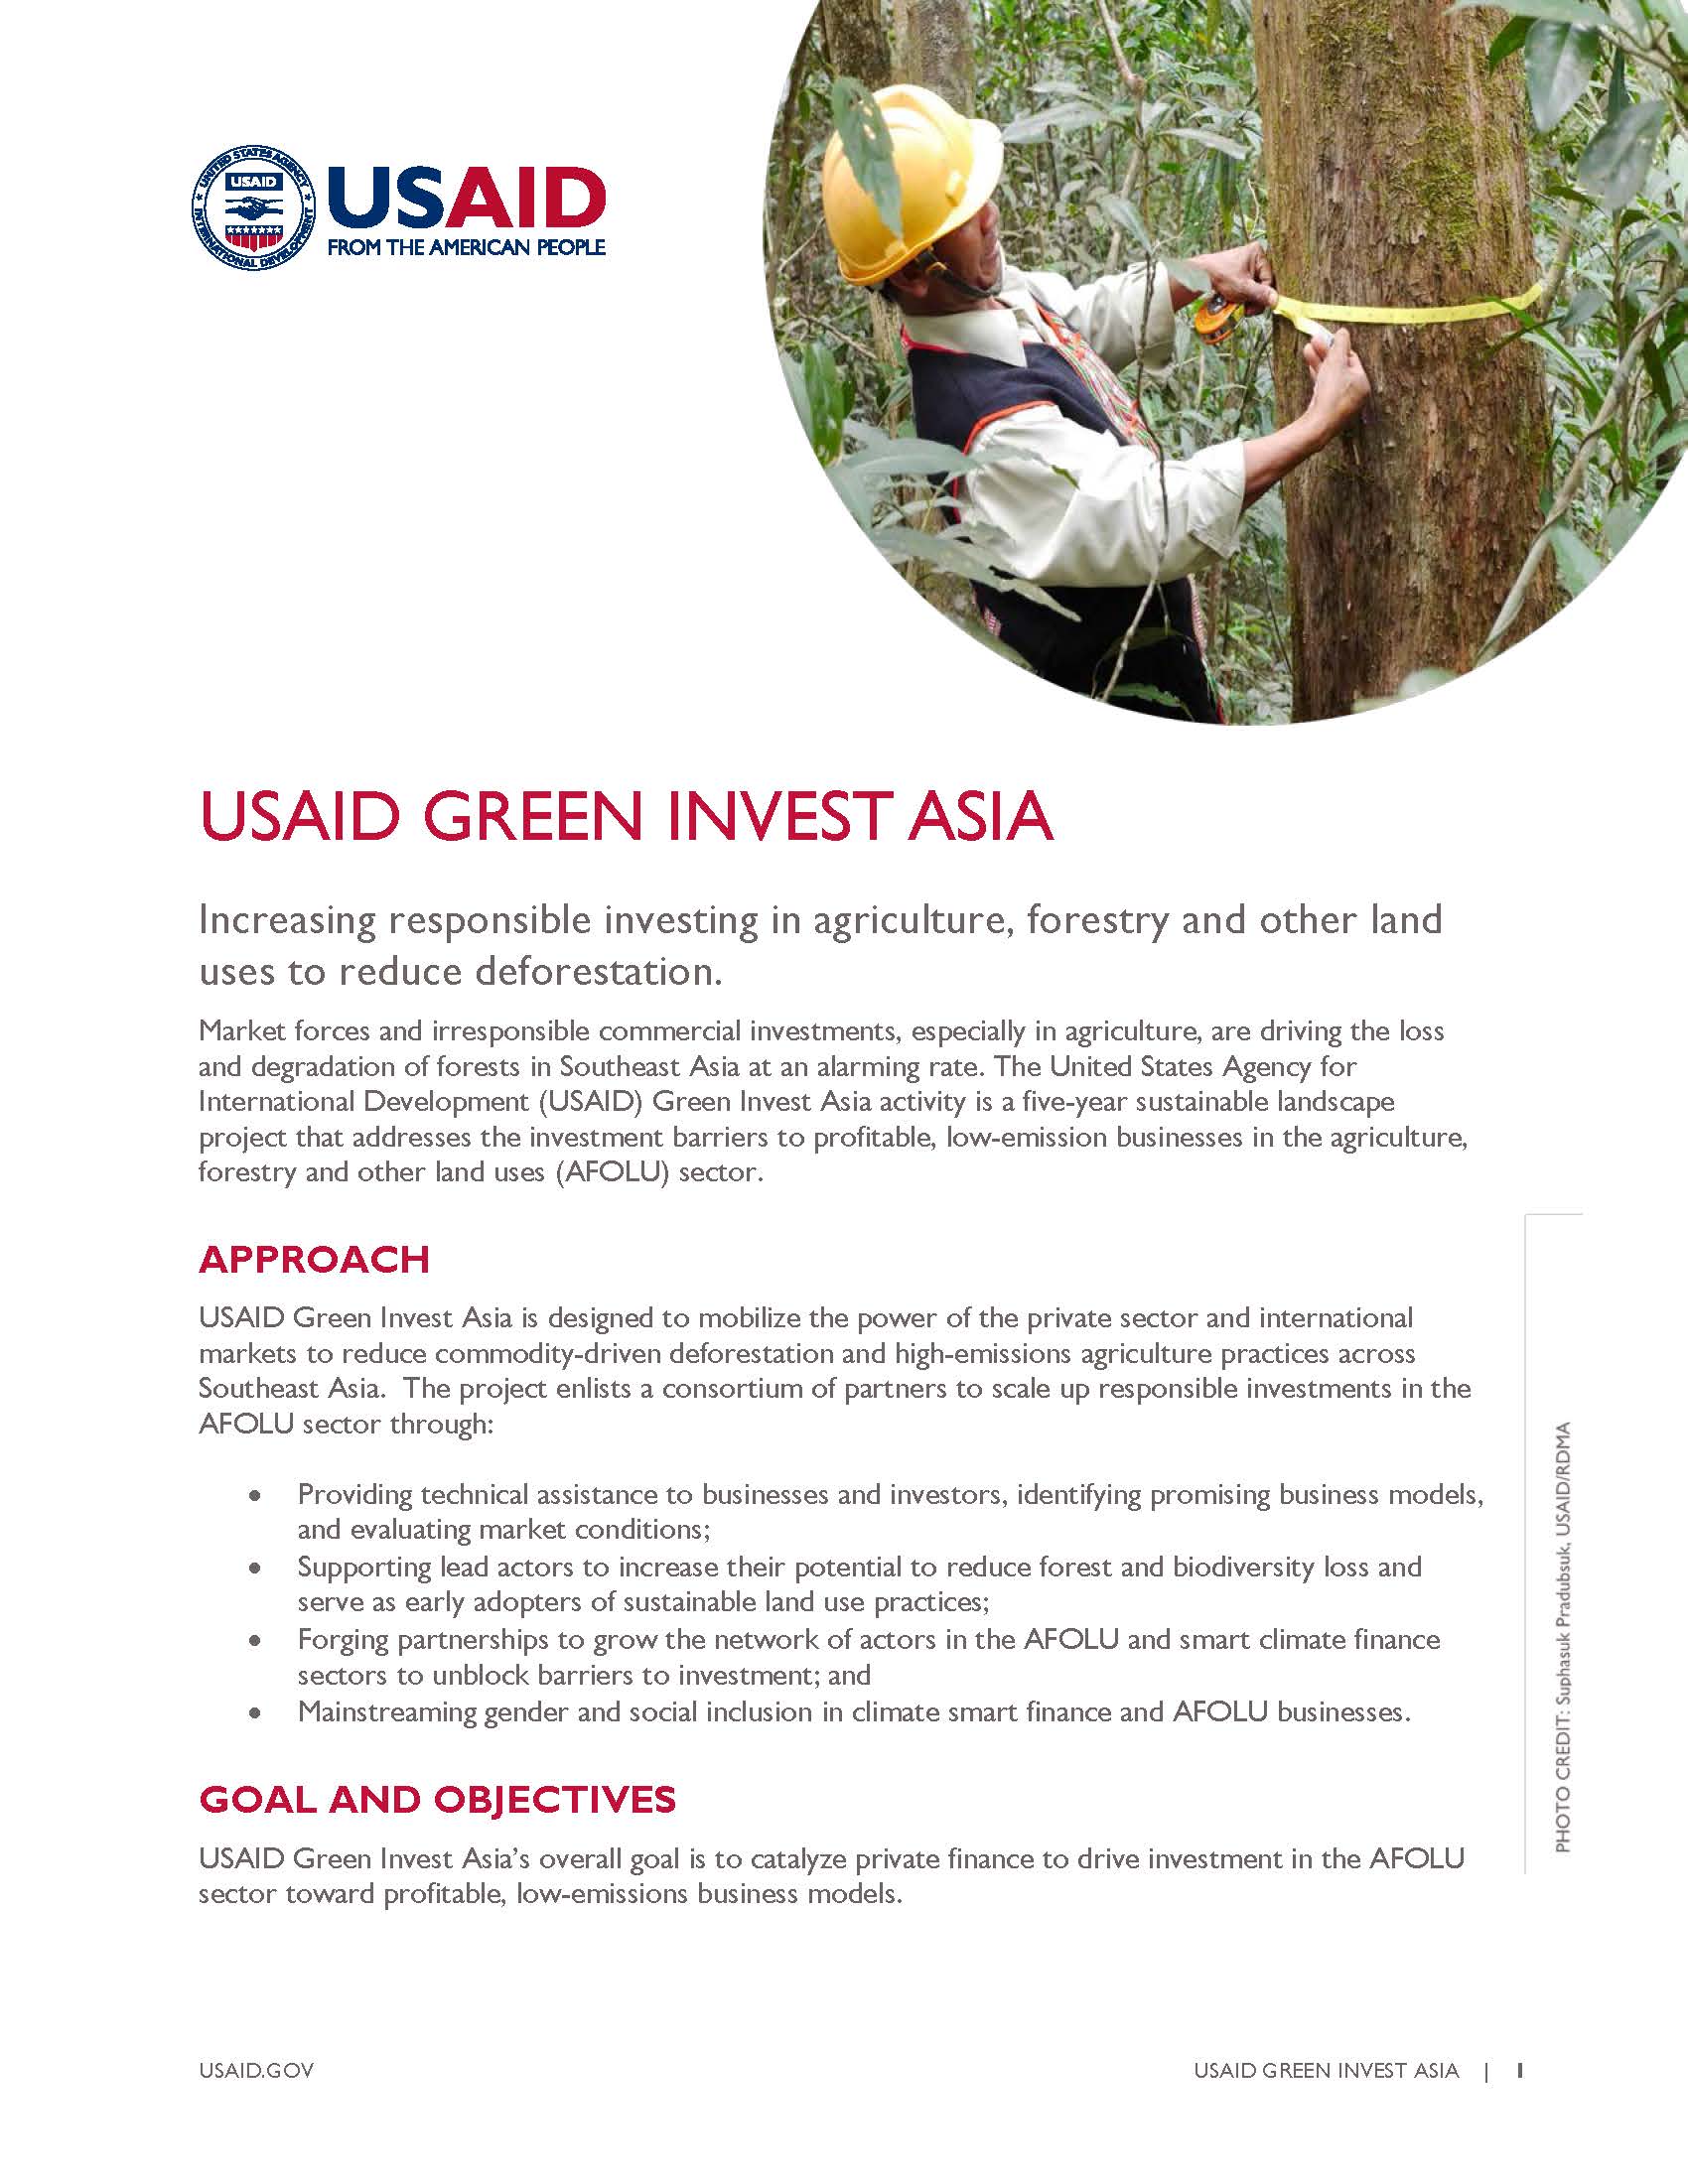 USAID GREEN INVEST ASIA  